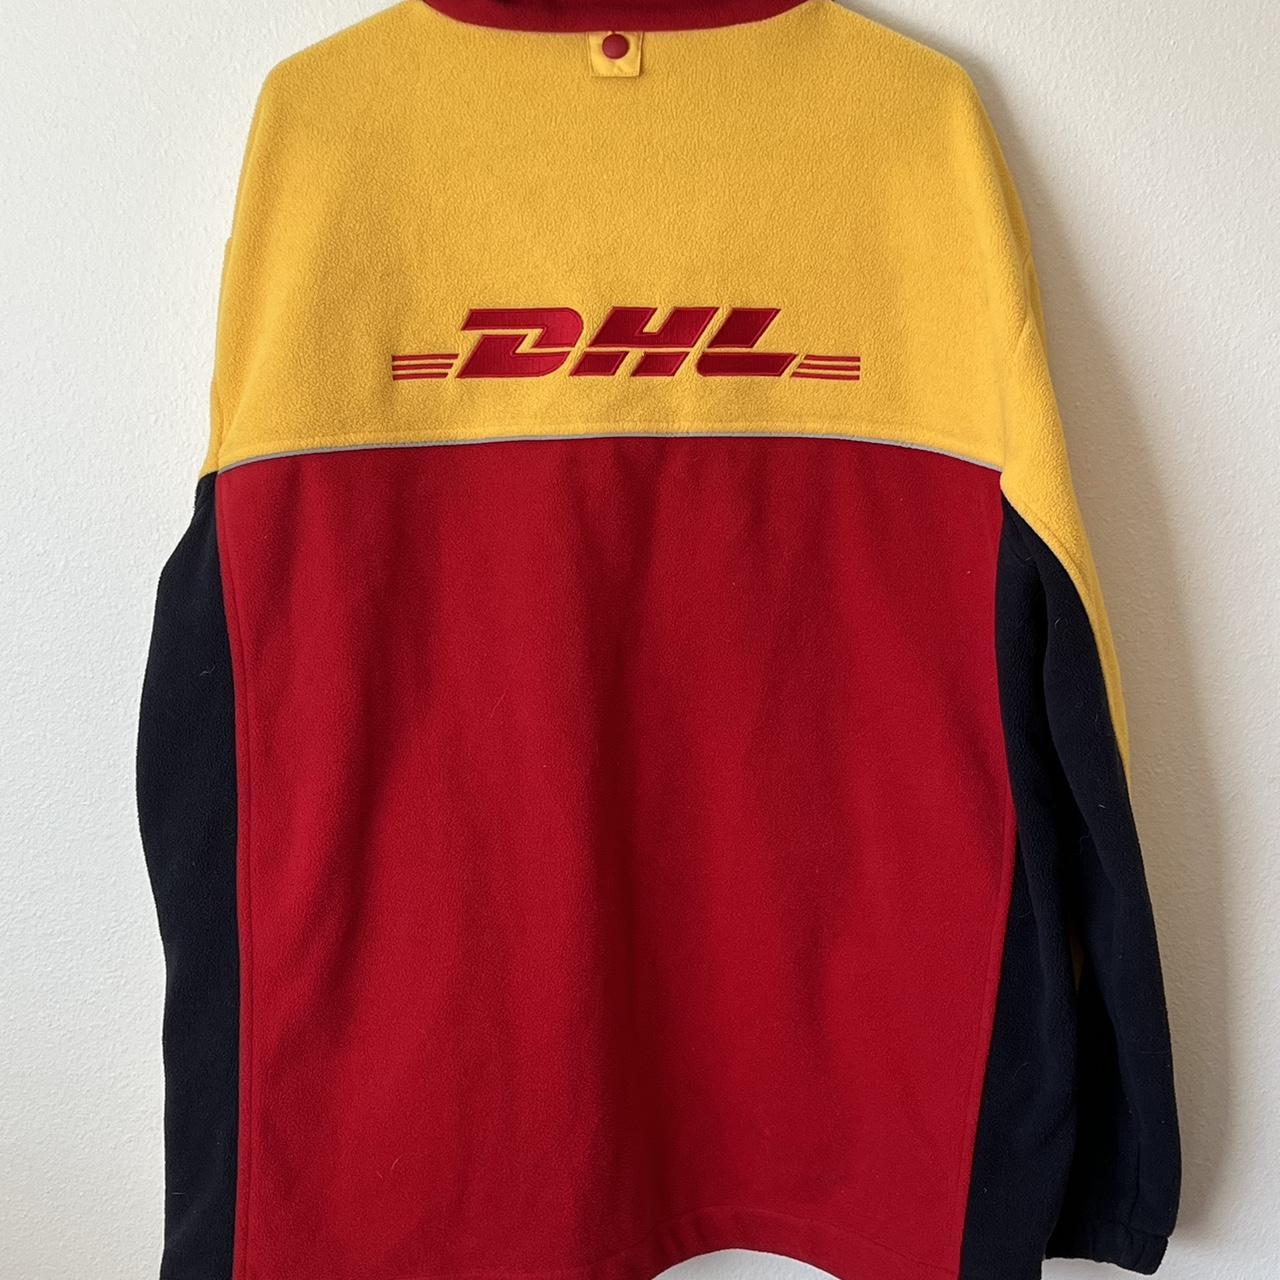 Sweet DHL fleece with cool zippers and embroidery... - Depop